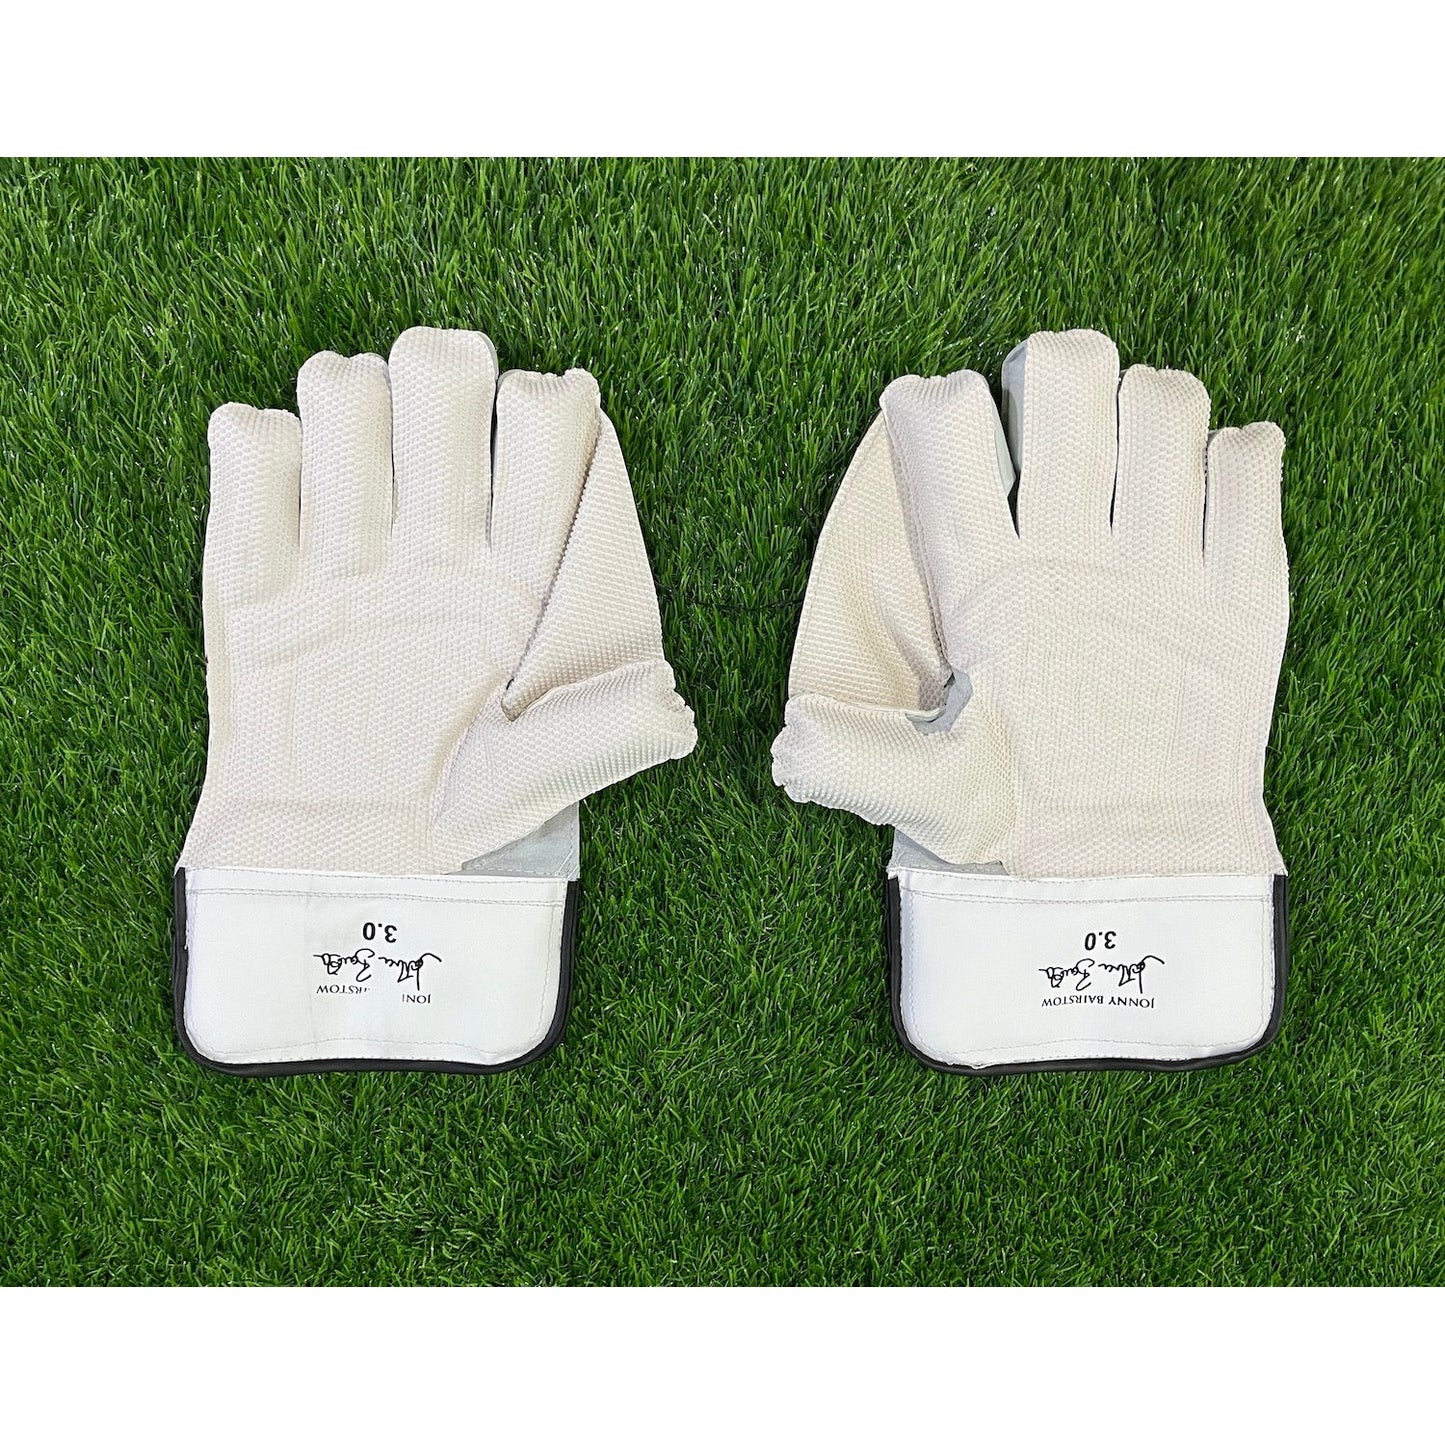 SS TON Pro Wicket Keeping Gloves